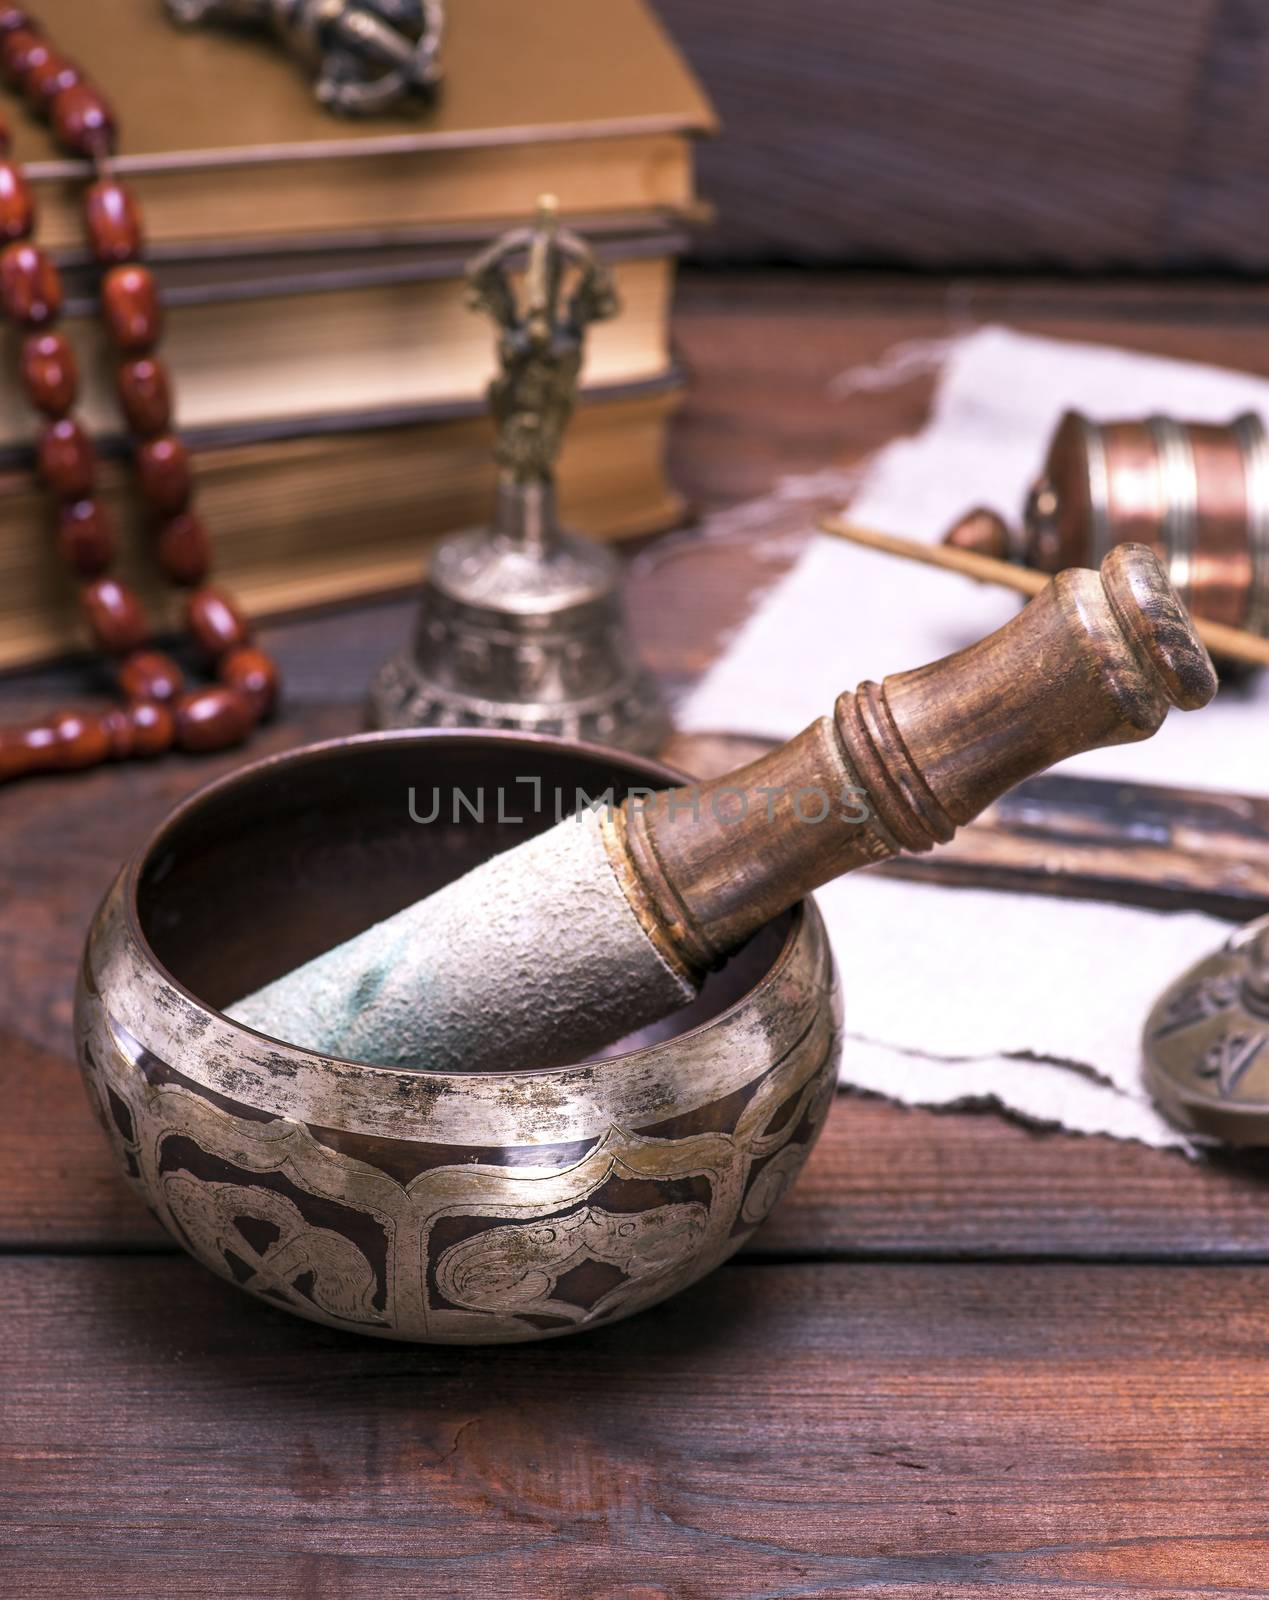  copper singing bowl and a wooden sticks by ndanko